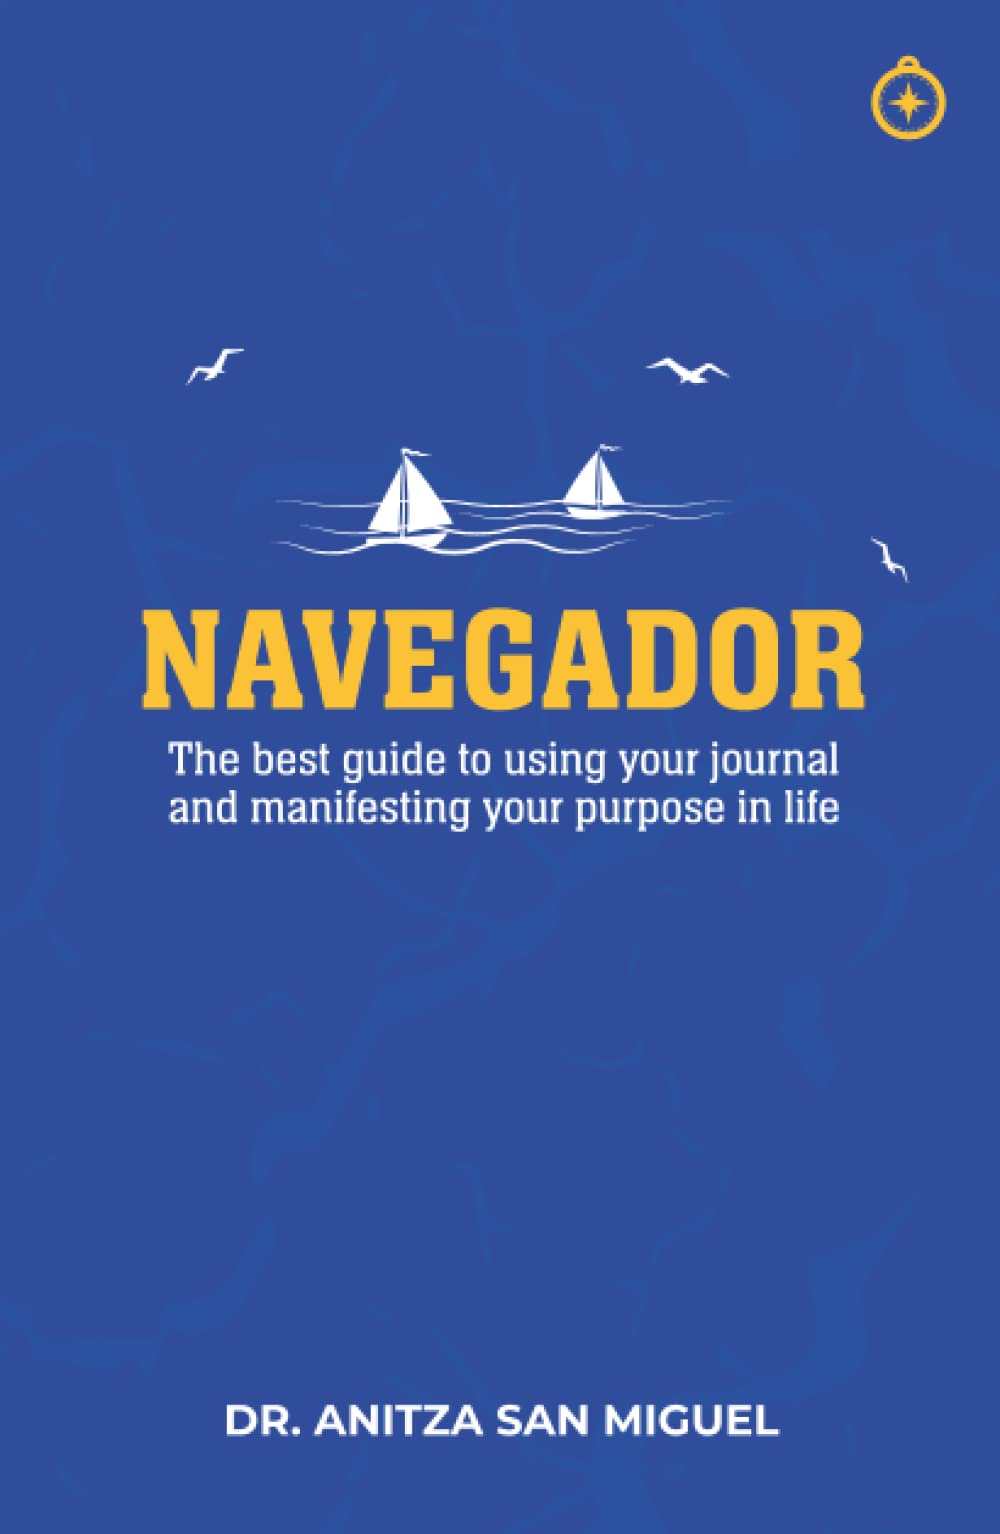 NAVEGADOR: The best guide to using your journal and manifesting your purpose in life (English Edition)